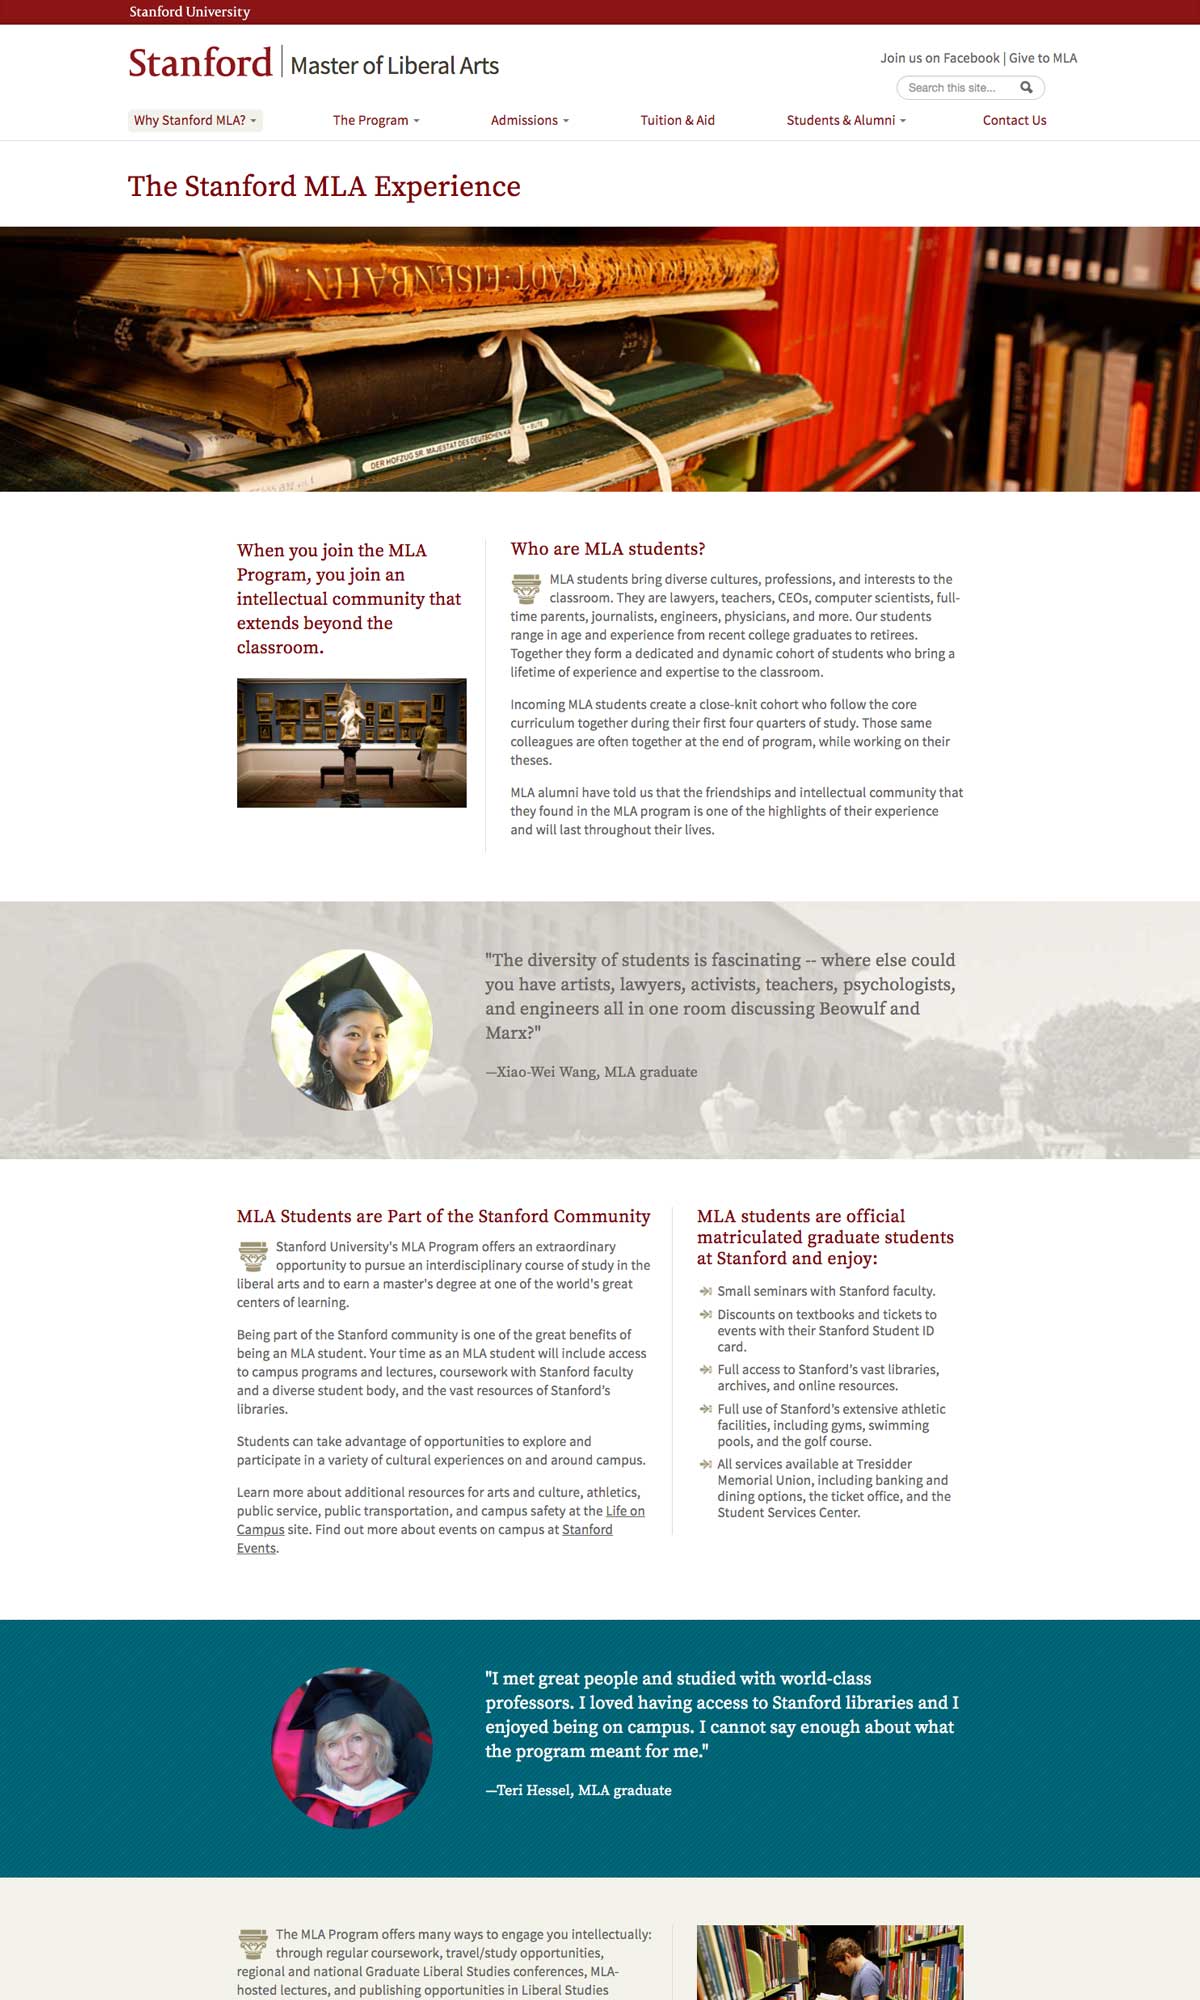 The Stanford MLA Experience Page